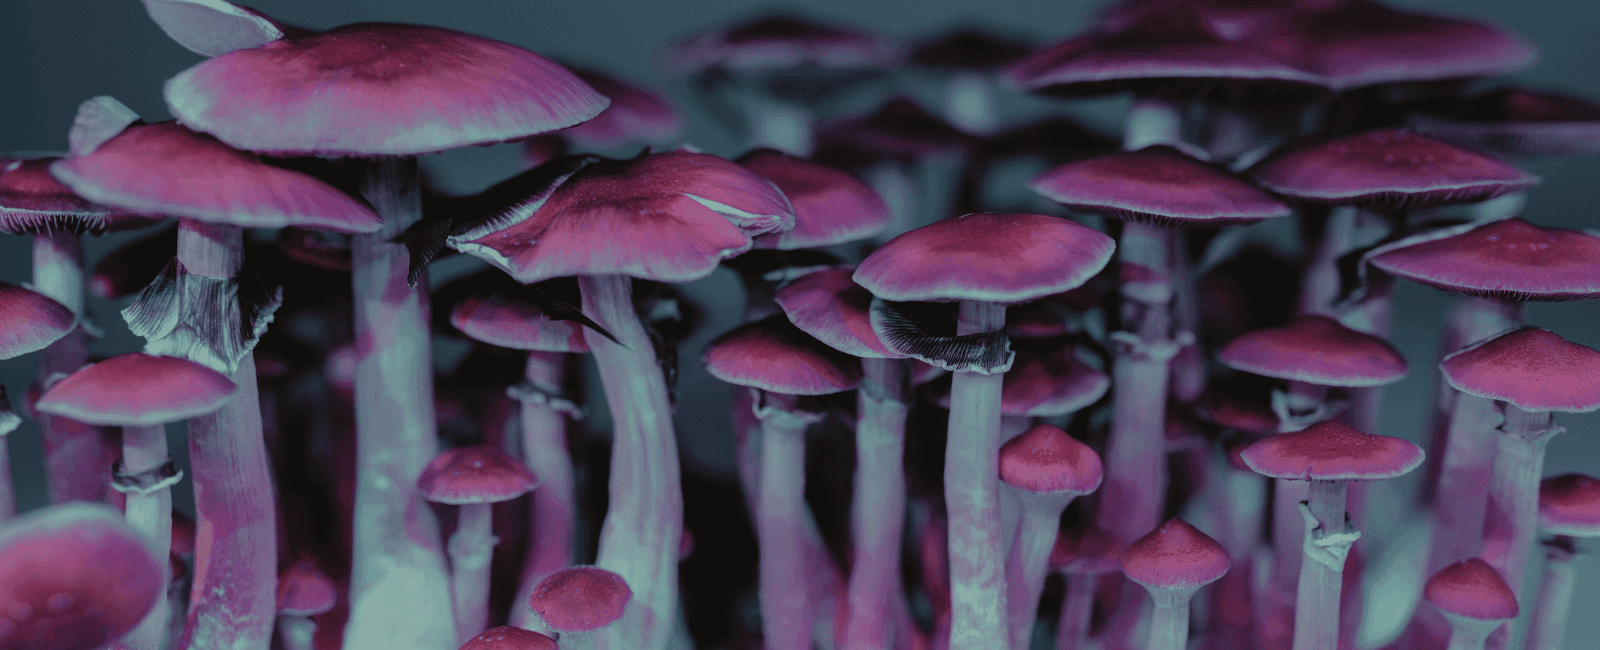 A New Study Links Non-Clinical Psilocybin Use to Improved Mental Health